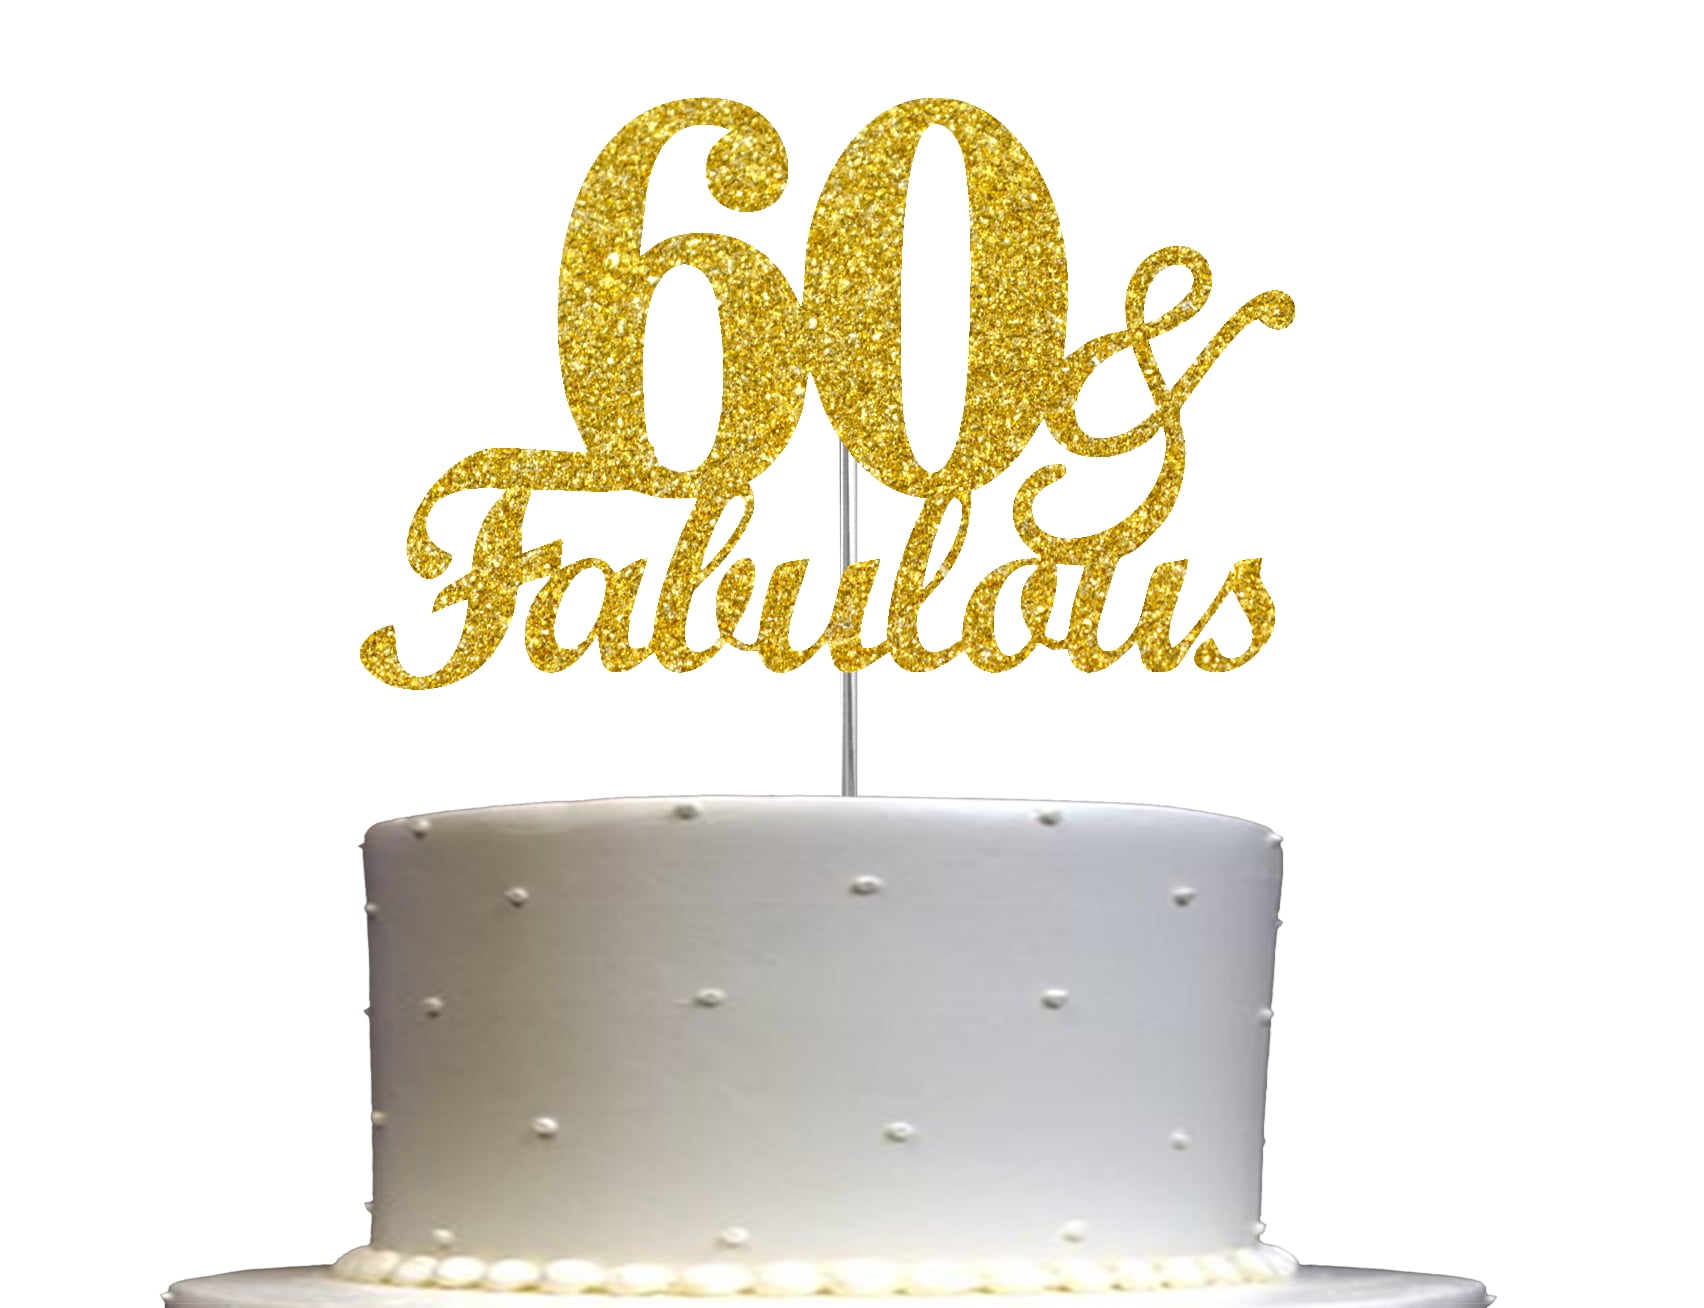 346 60th Birthday Cake Images, Stock Photos, 3D objects, & Vectors |  Shutterstock